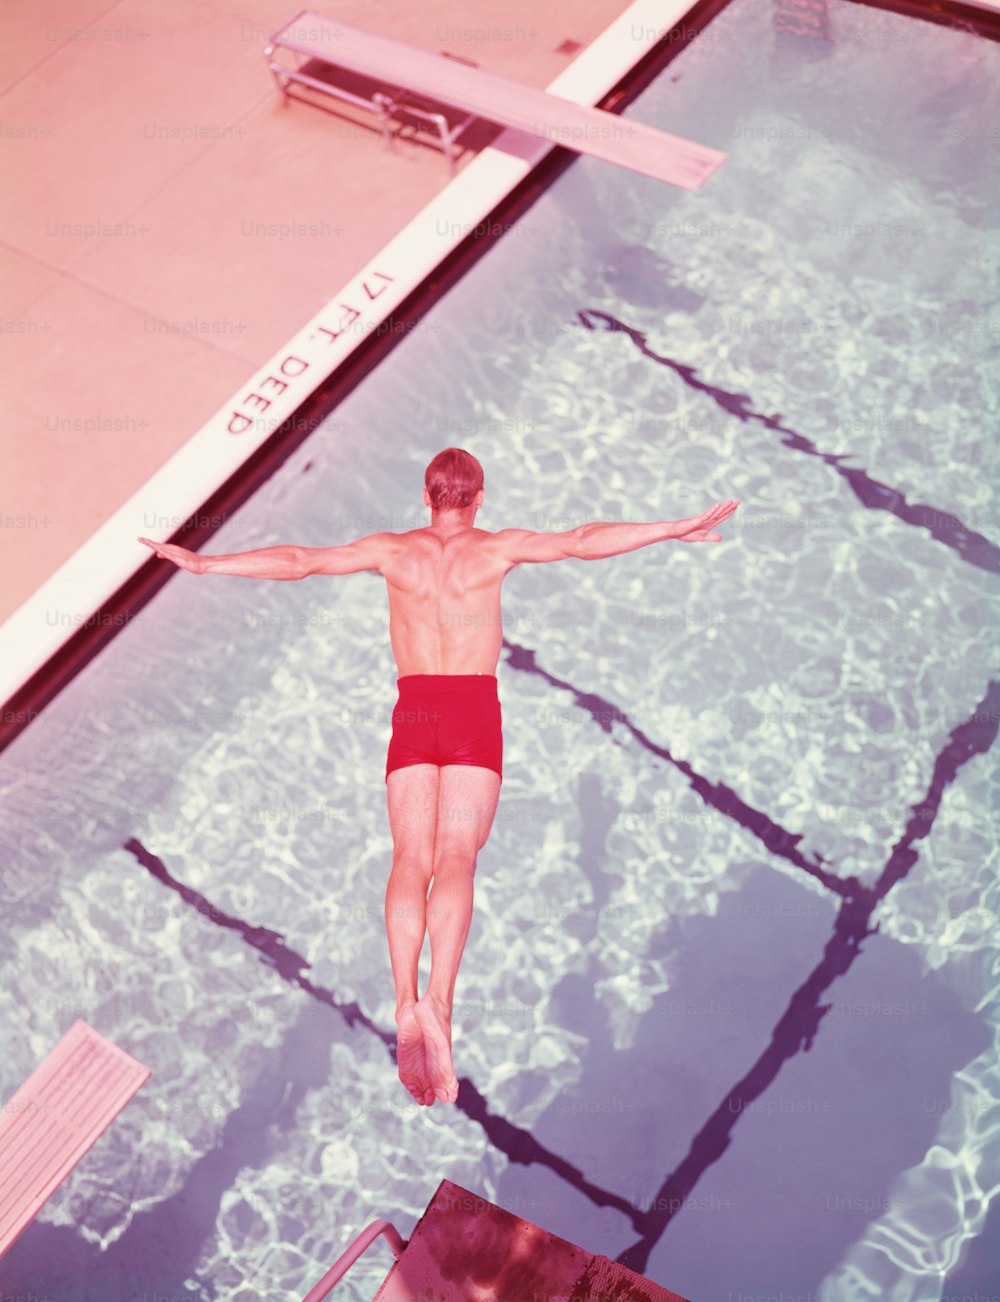 UNITED STATES - CIRCA 1950s:  Man diving into swimming pool, overhead view.